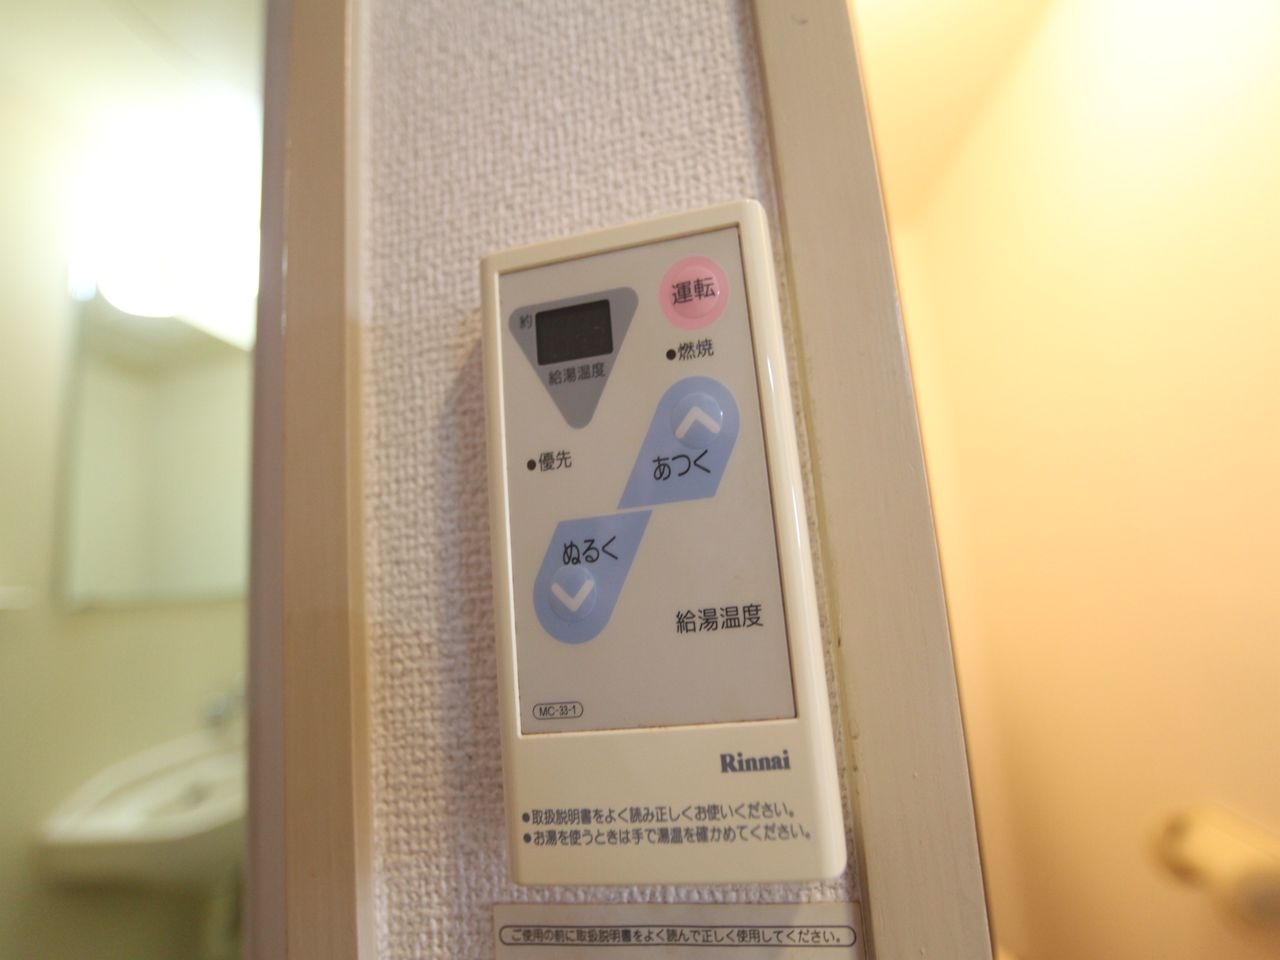 Other. Hot-water supply equipment You can adjust the temperature in the button